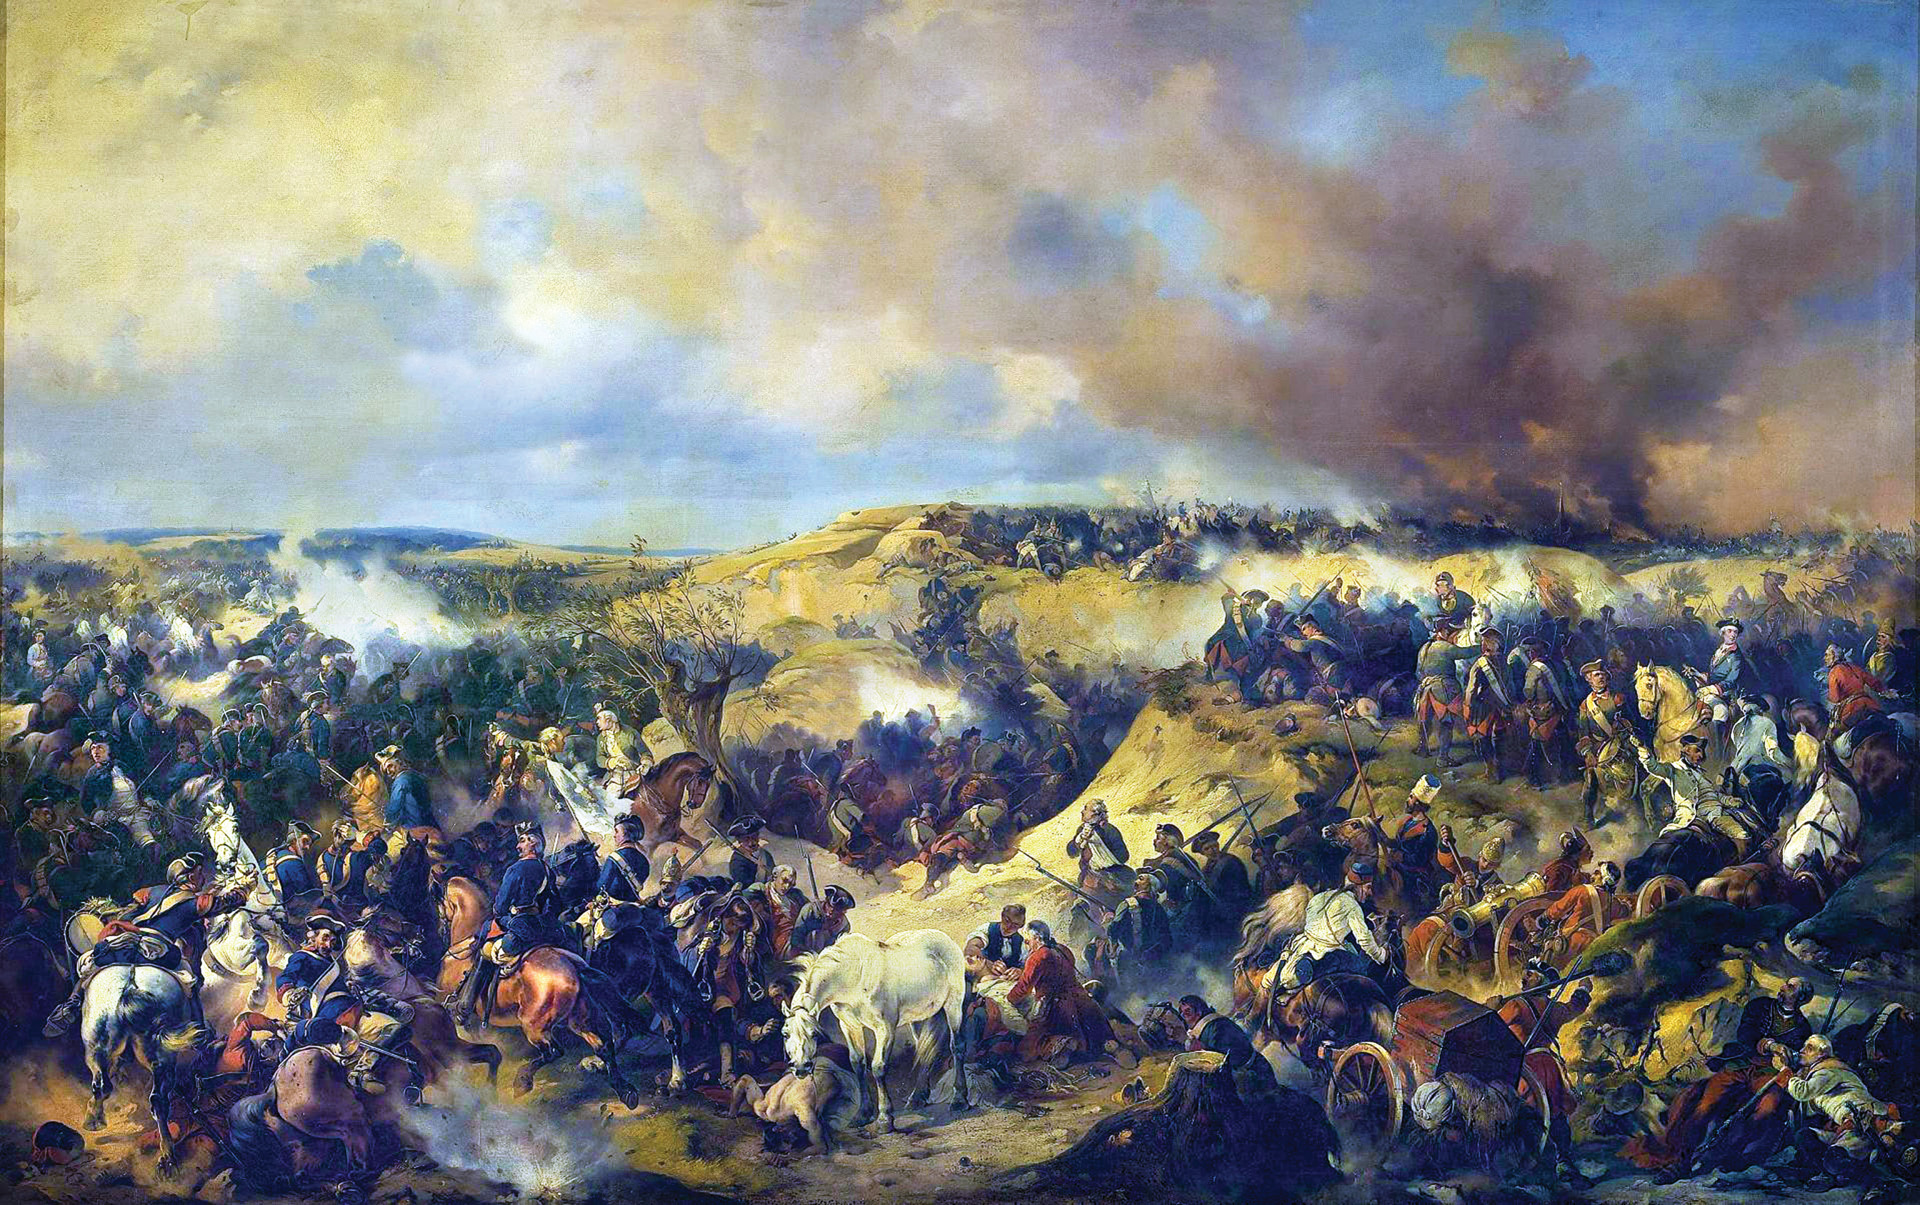 Prussian forces at left assail the Russians atop the sandy hills at right. Frederick lost 20,000 men in the worst defeat of his career. 